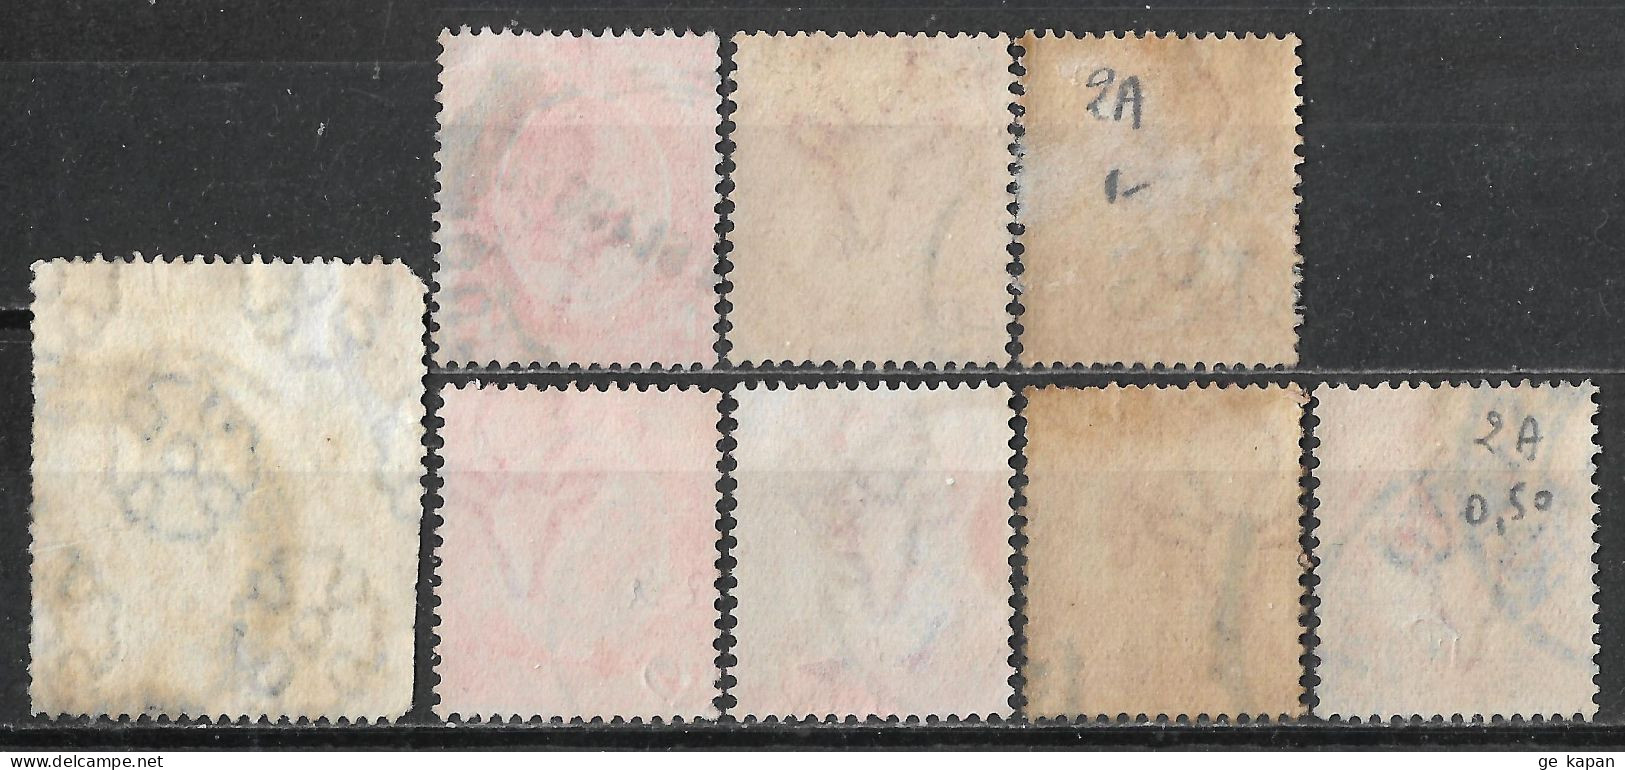 1910,1913 SOUTH AFRICA Set Of 8 USED STAMPS (Scott # 1a,3Aa) CV €3.90 - Usati